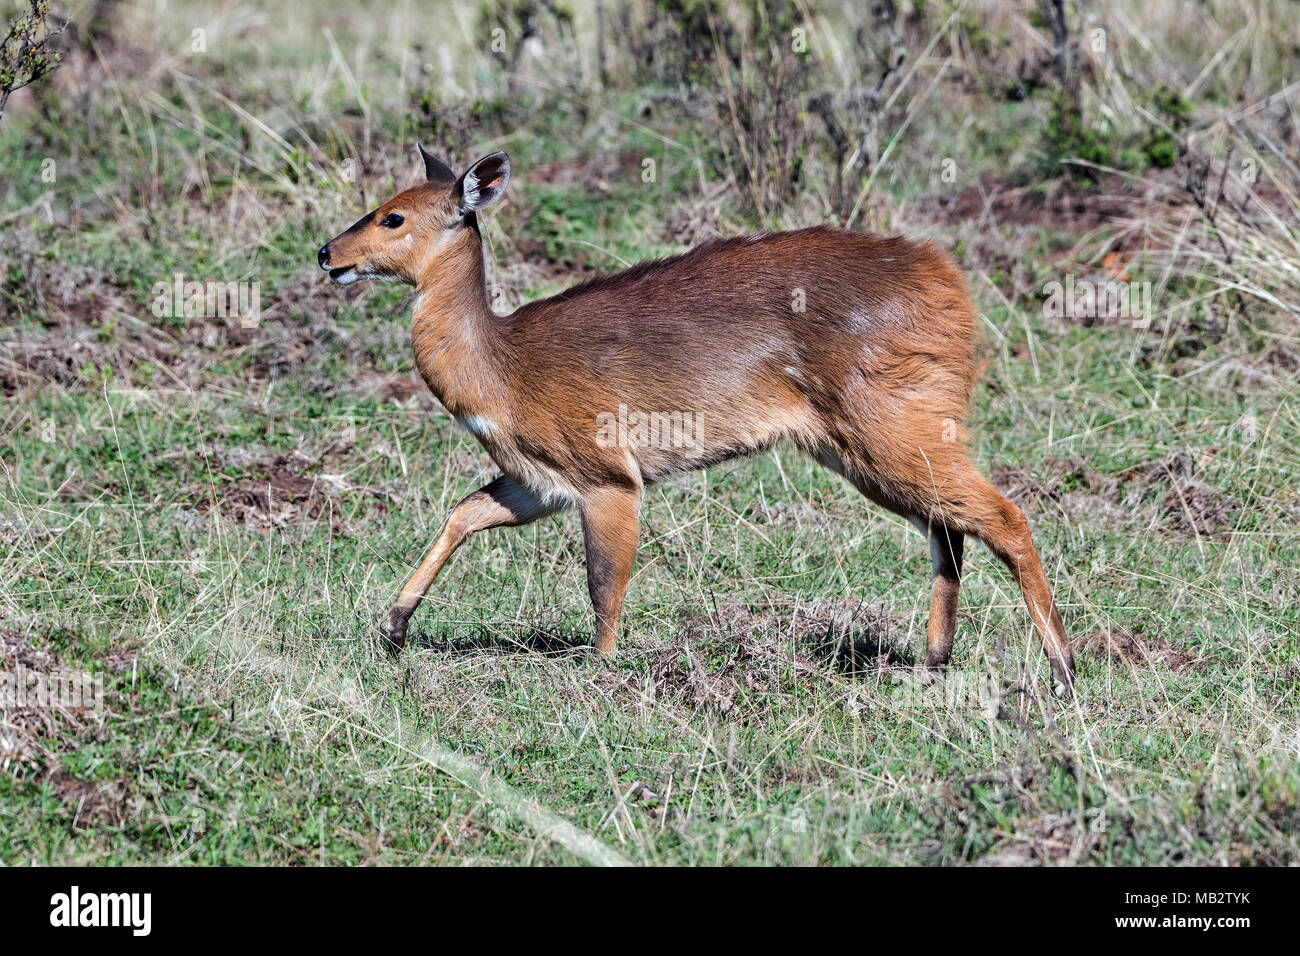 Cape Bushbuck High Resolution Stock Photography and Images - Alamy